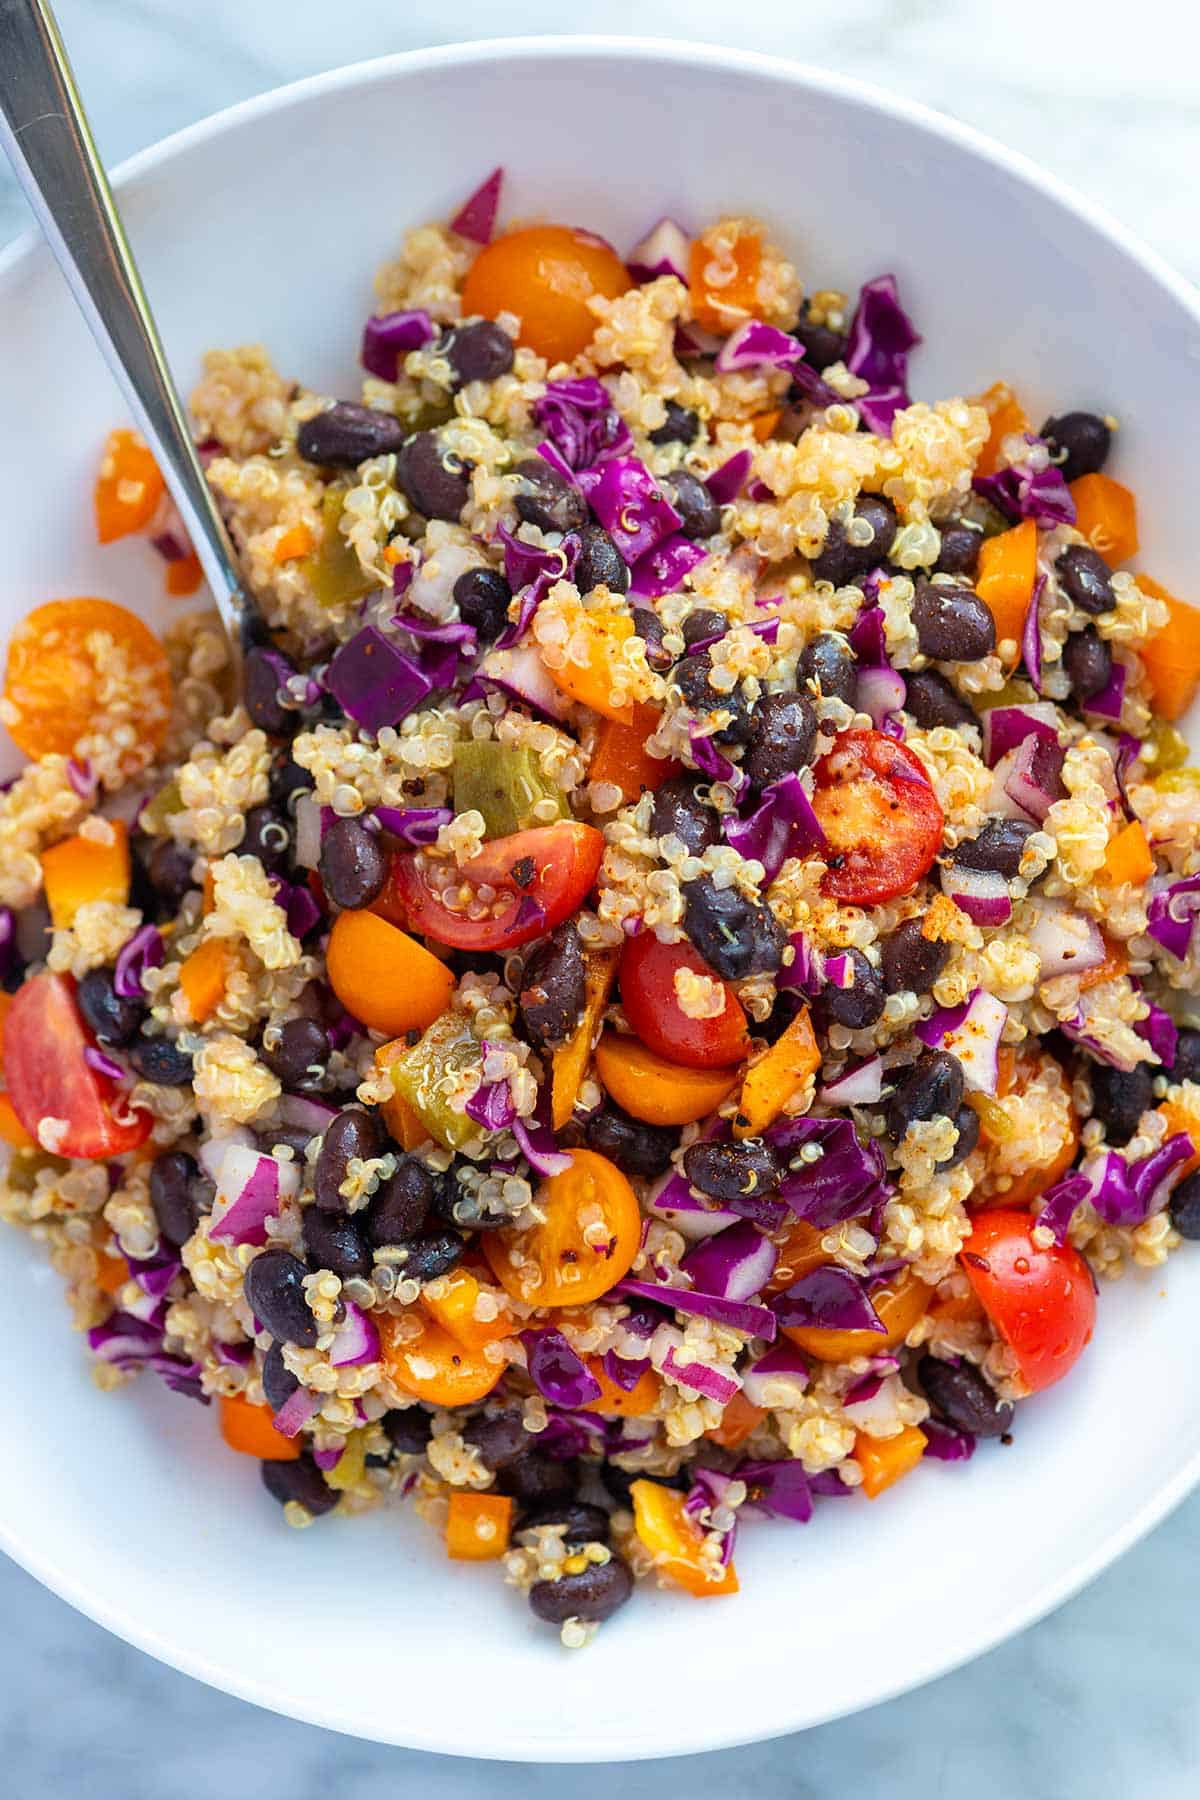 Black Bean and Quinoa Salad with black beans, quinoa, vegetables, and a zesty dressing